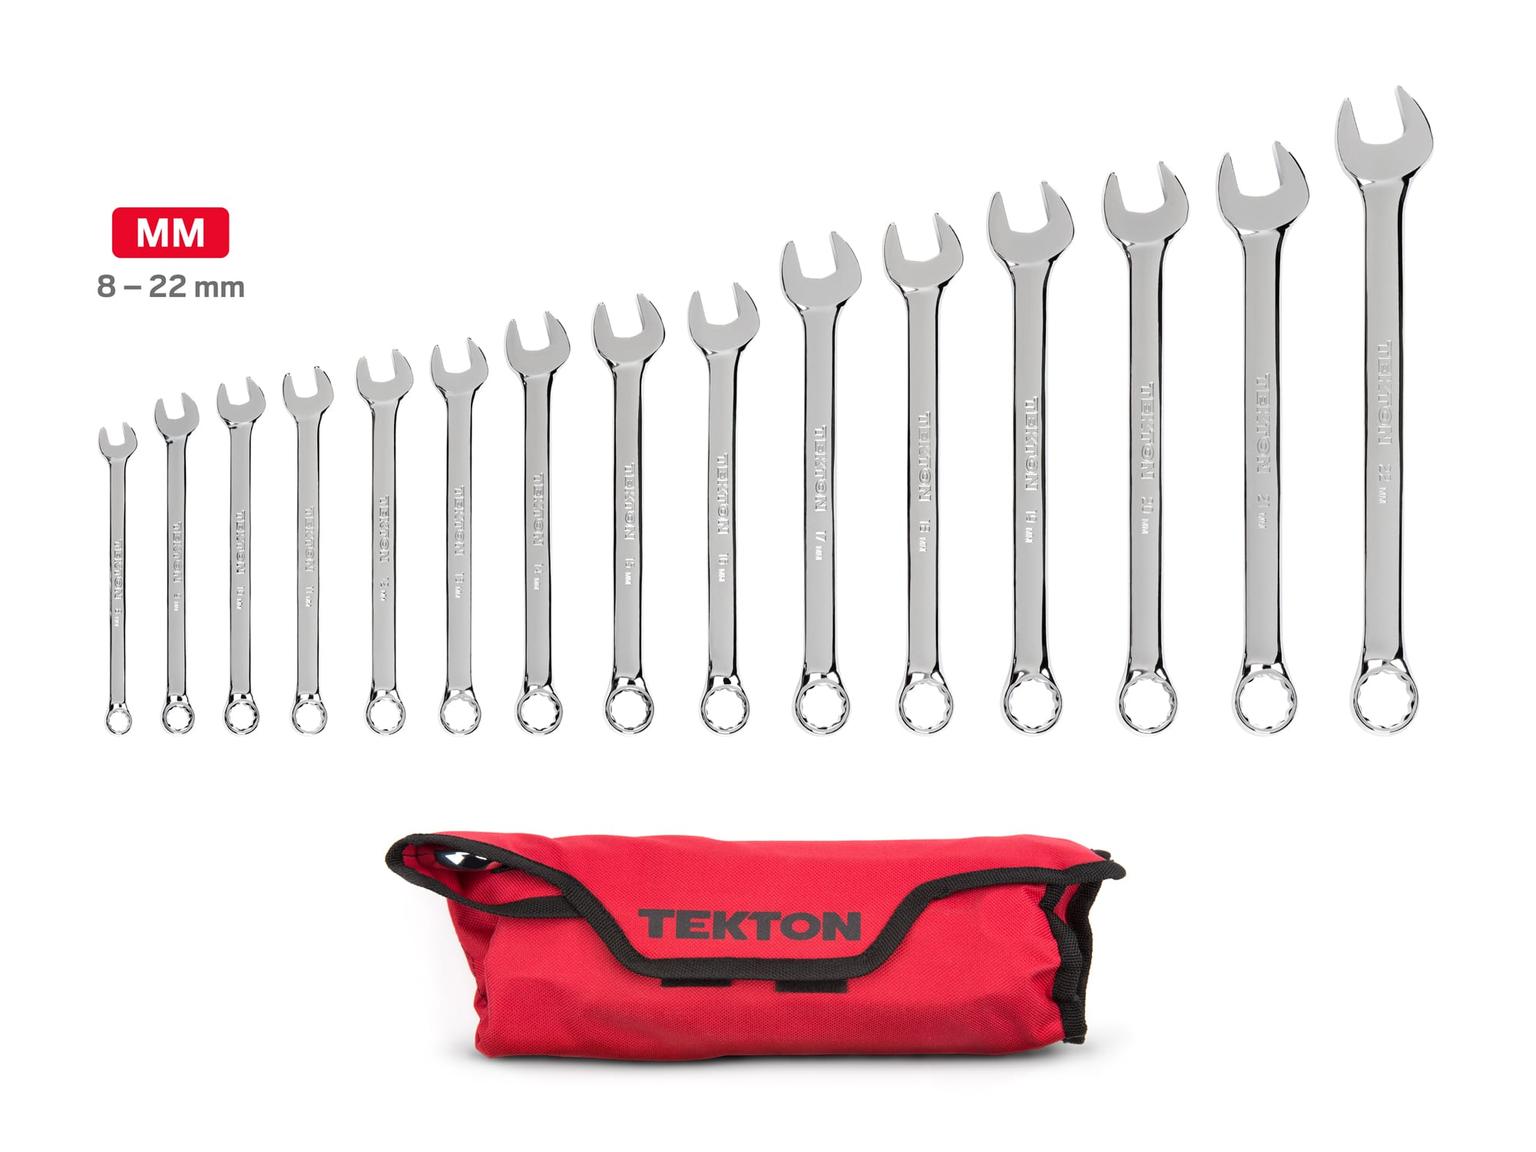 TEKTON WRN03393-T Combination Wrench Set with Pouch, 15-Piece (8 - 22 mm)